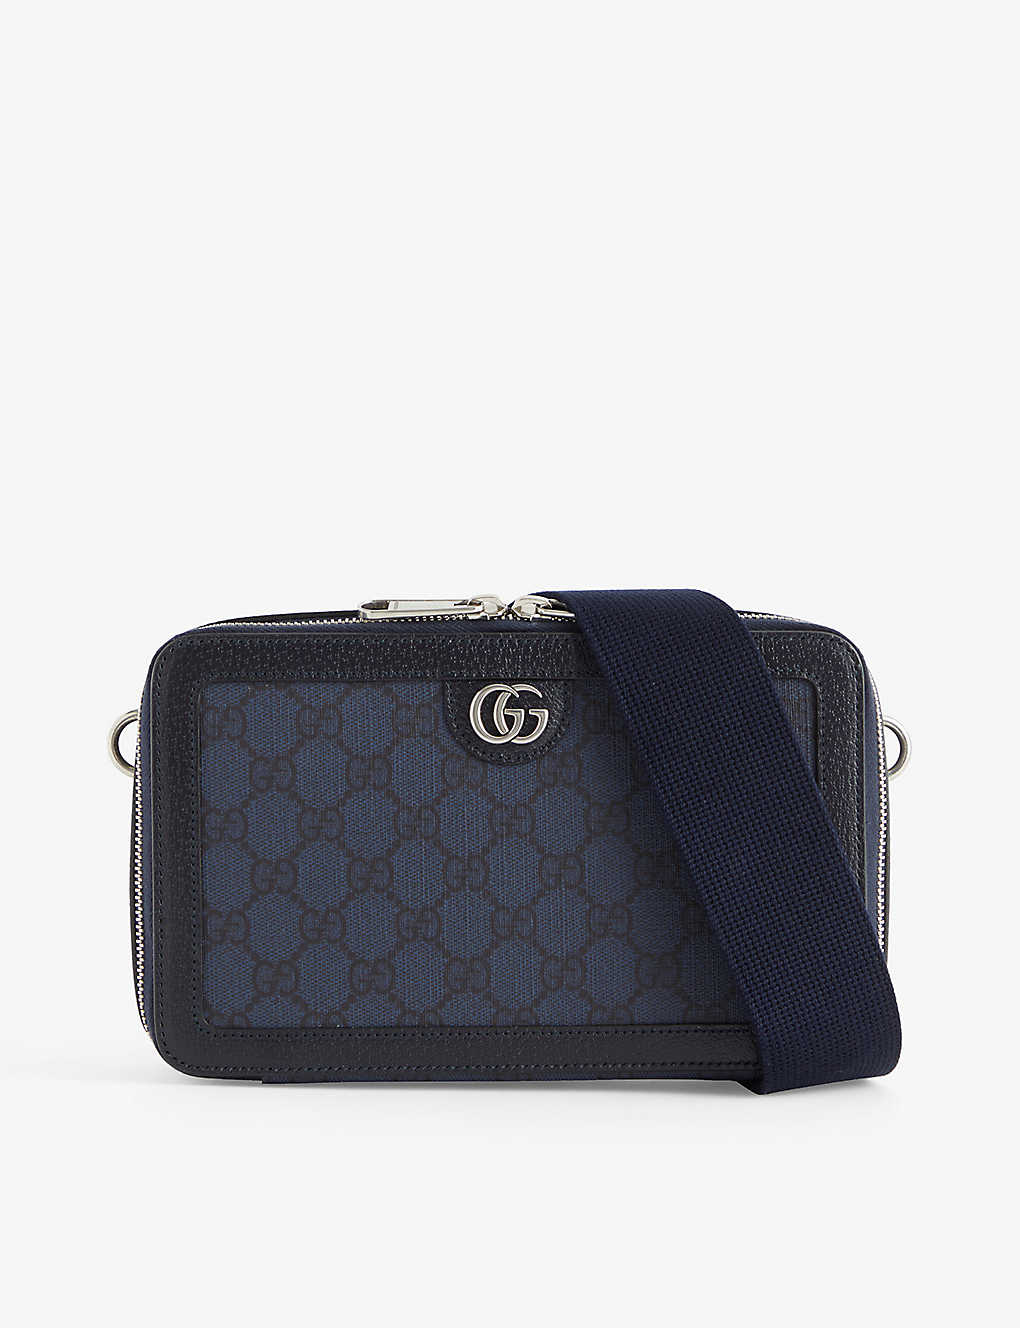 Gucci Ophidia Gg Coated Canvas Cross-body Bag In Bluedkblue/blue